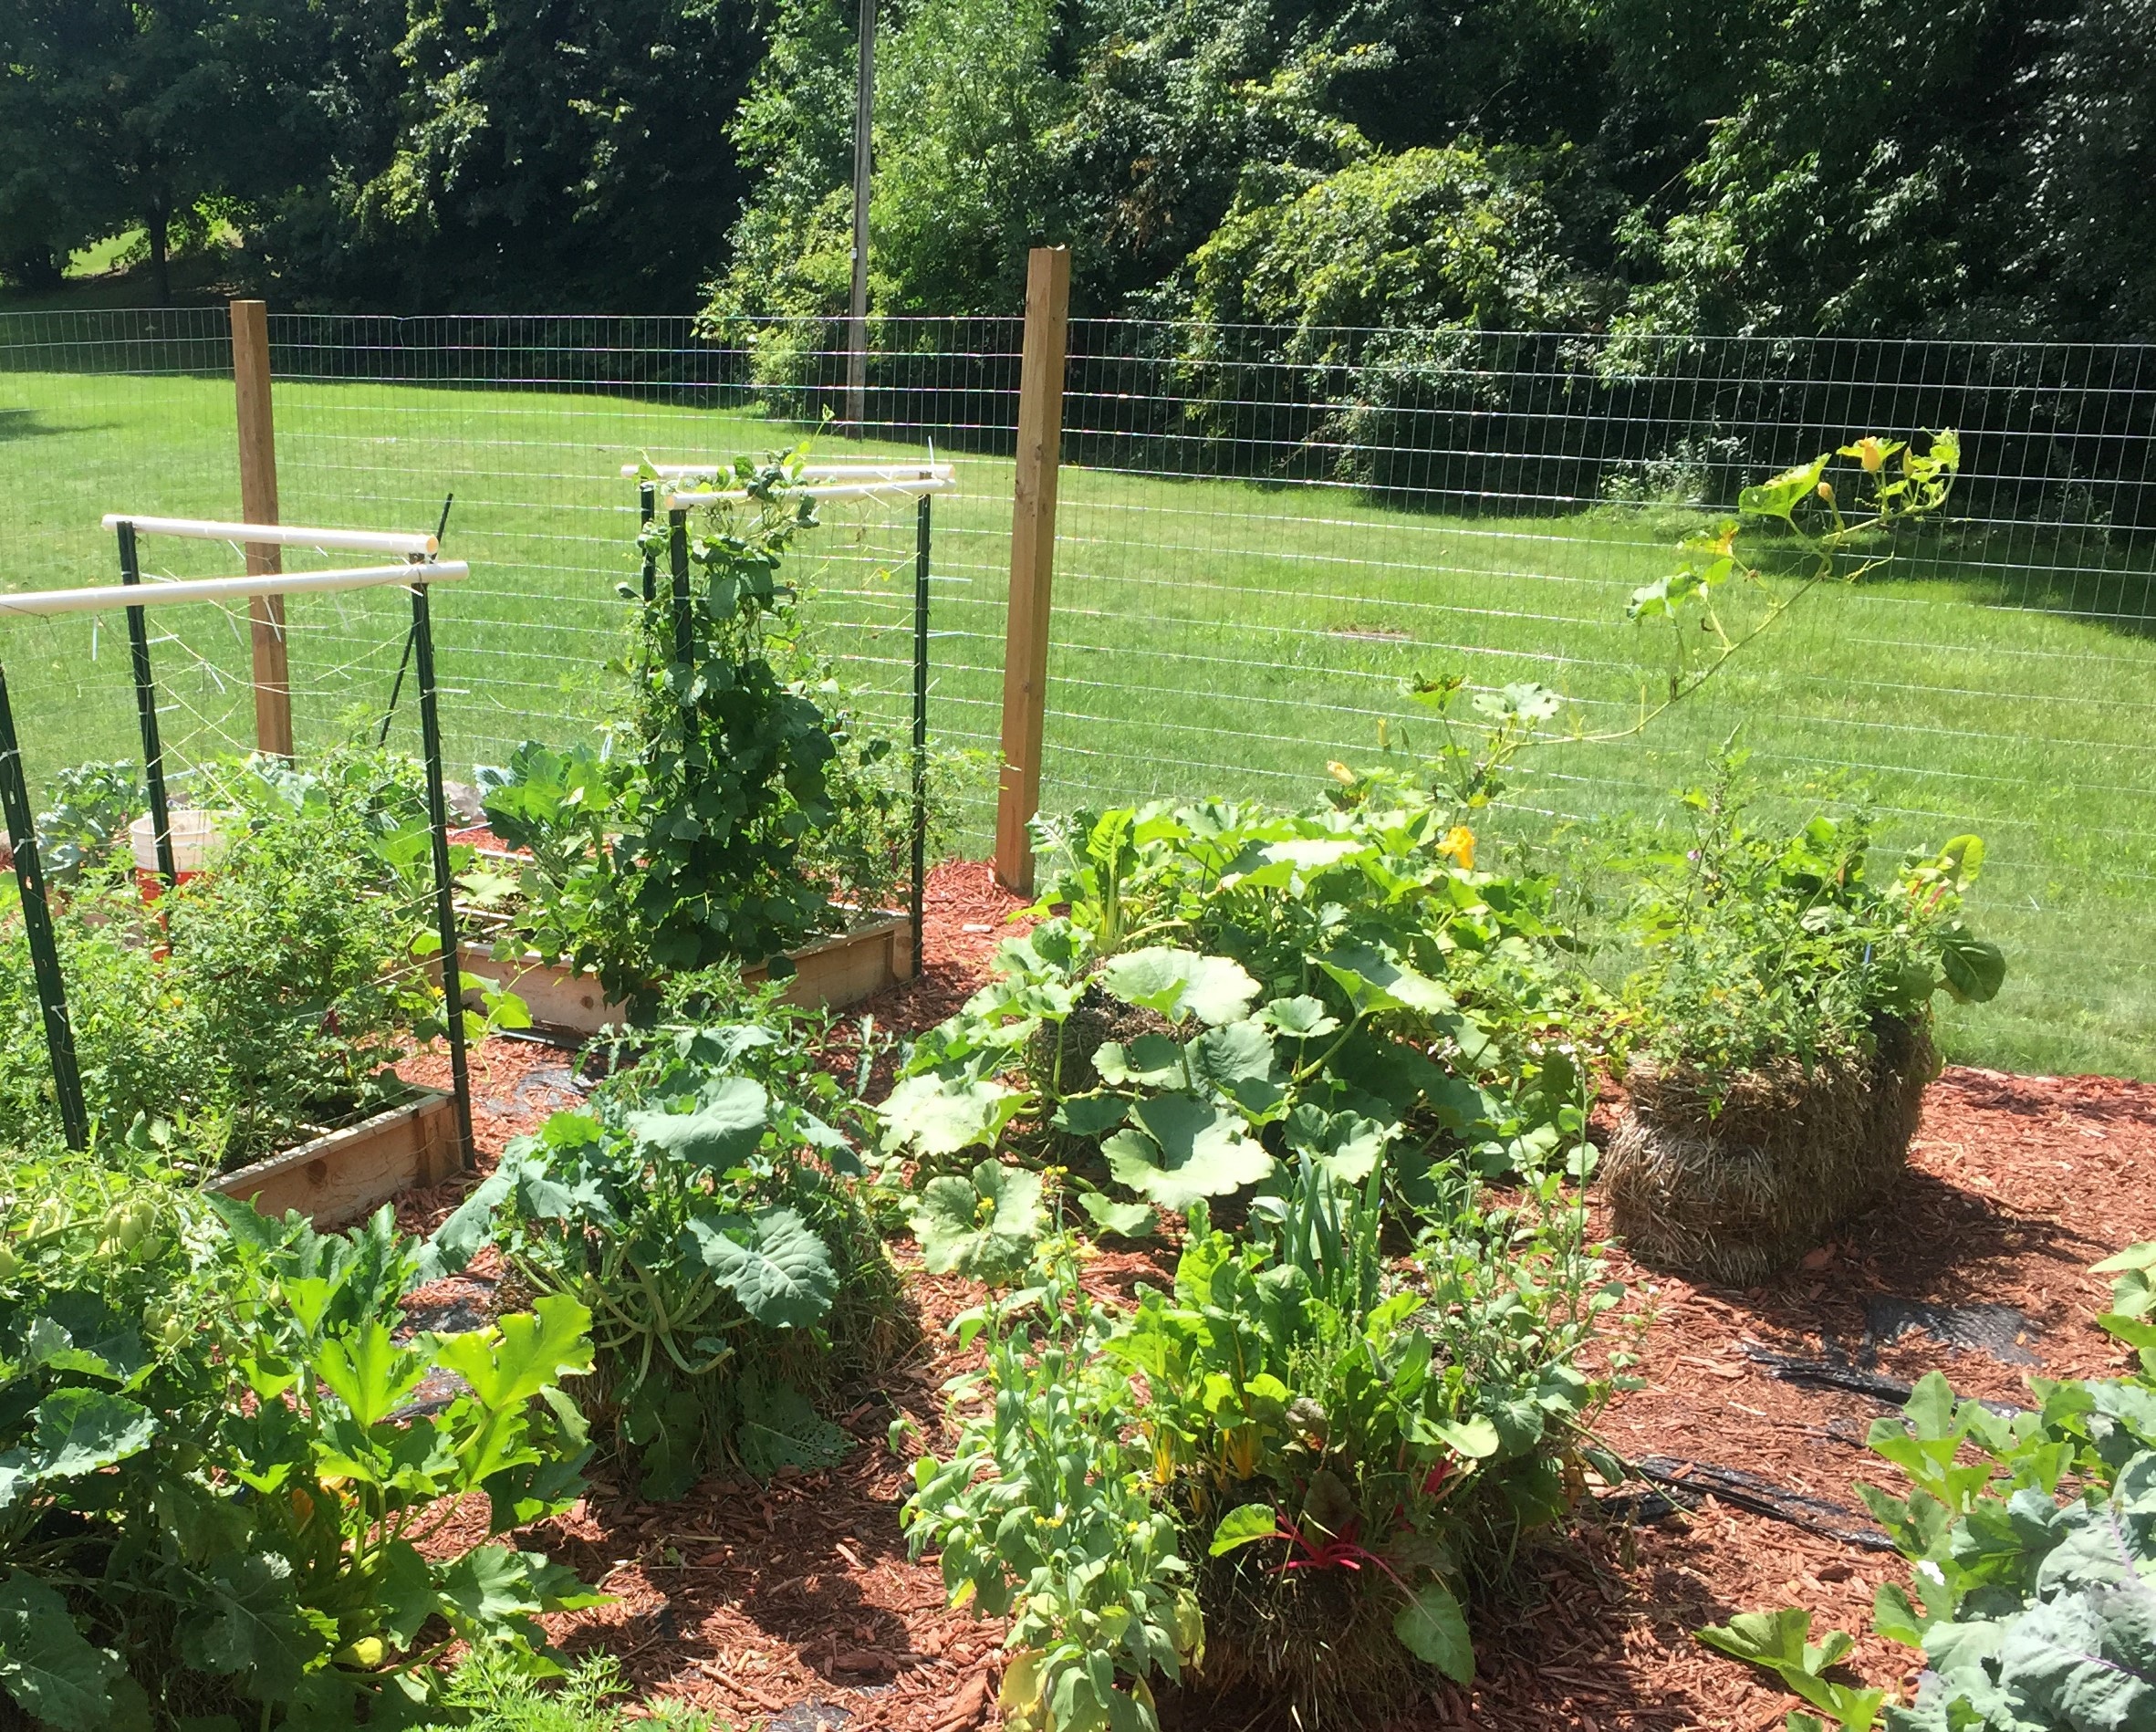 How to Start a Garden After 10 Years of Mowing - Tips, Tricks and Planning for Success